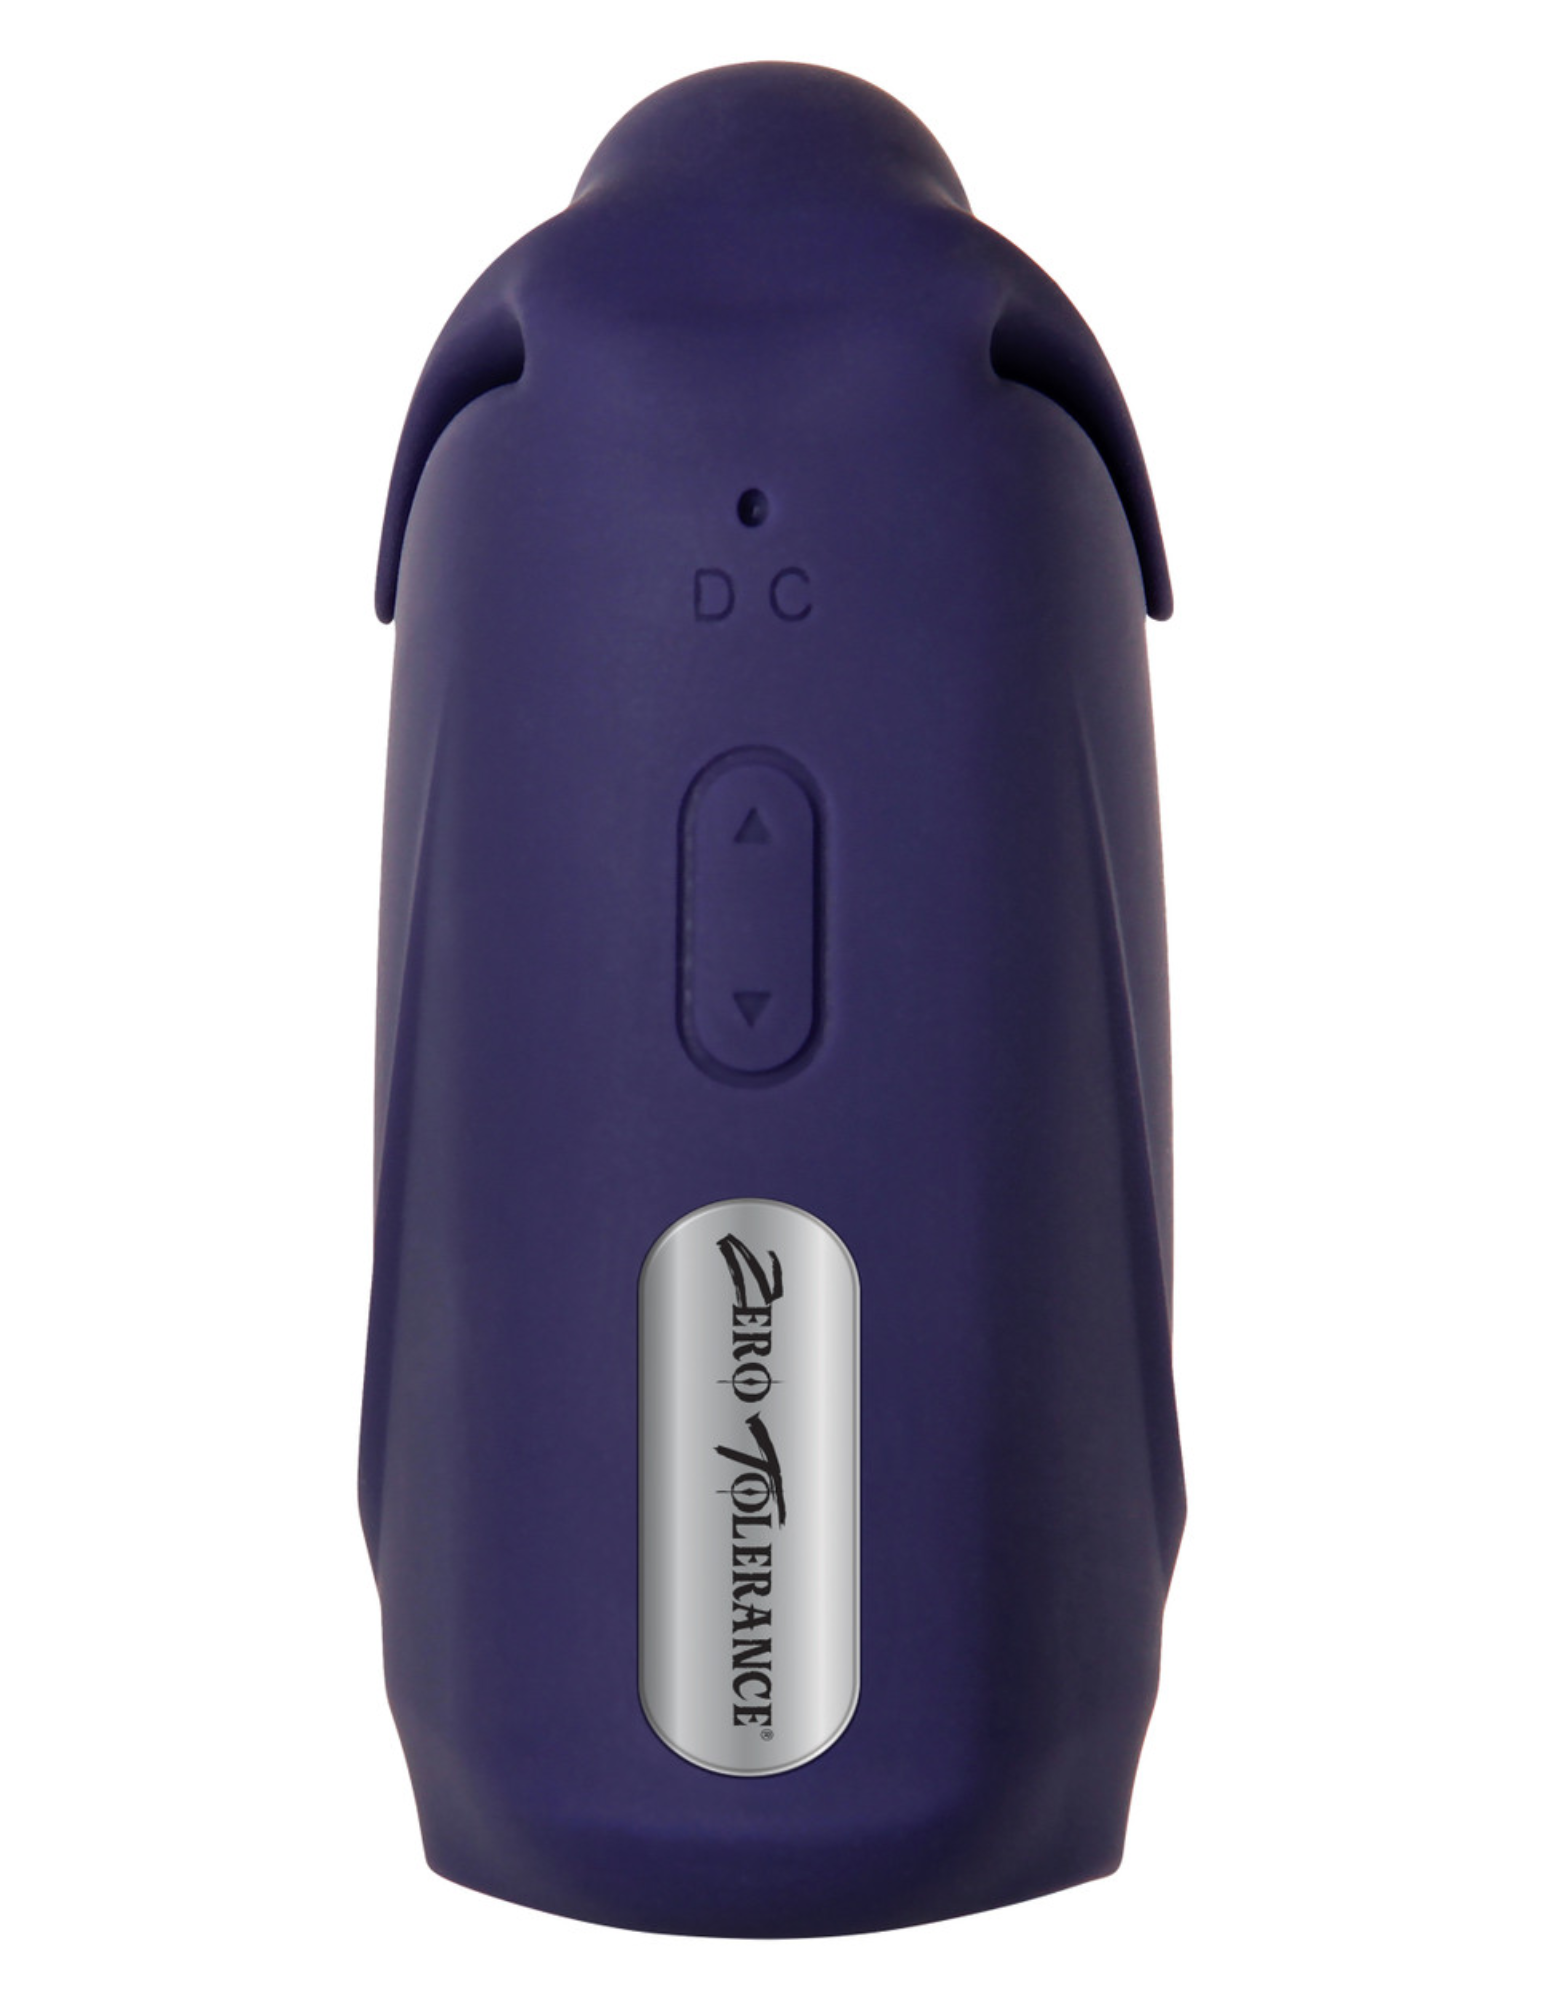 Close-up of the back of the Different Strokes Rechargeable Vibrating Masturbator from Zero Tolerance with the top portion closed and showing the control buttons.